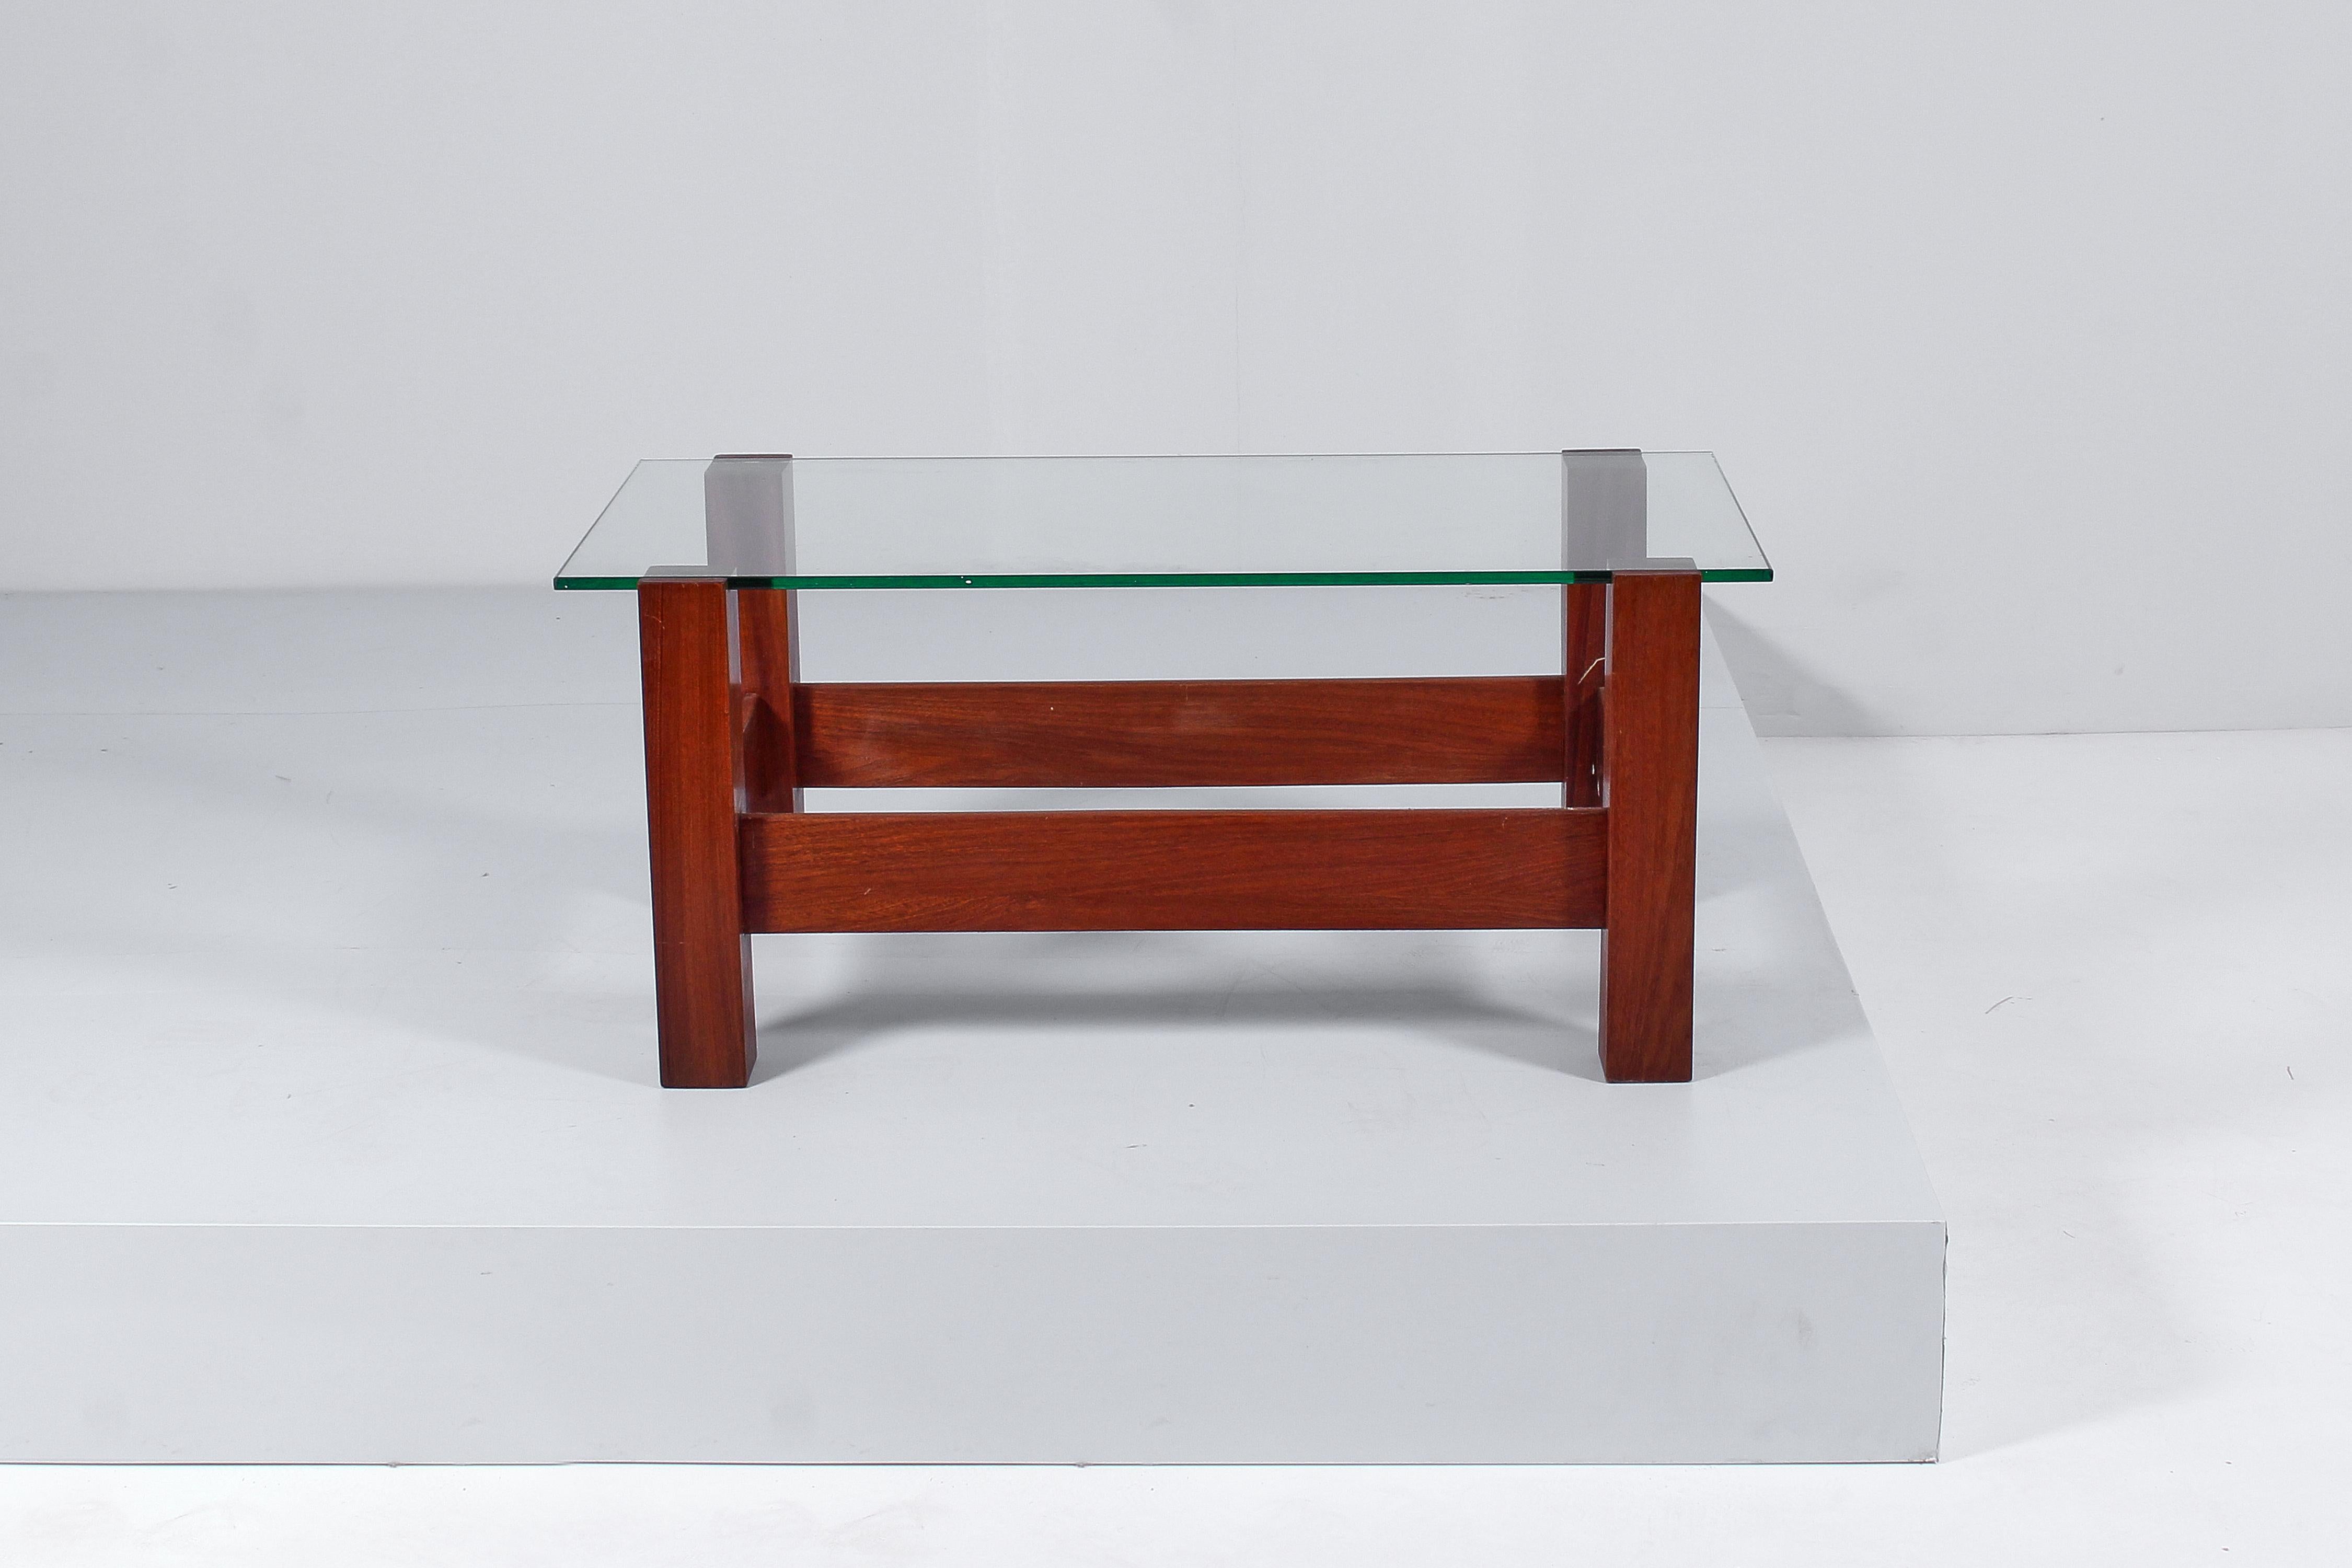 Coffee table with a geometric design, with wooden structure and rectangular glass top. In the style of Fontana Arte, Italian production from the 60s.
Wear consistent with age and use.